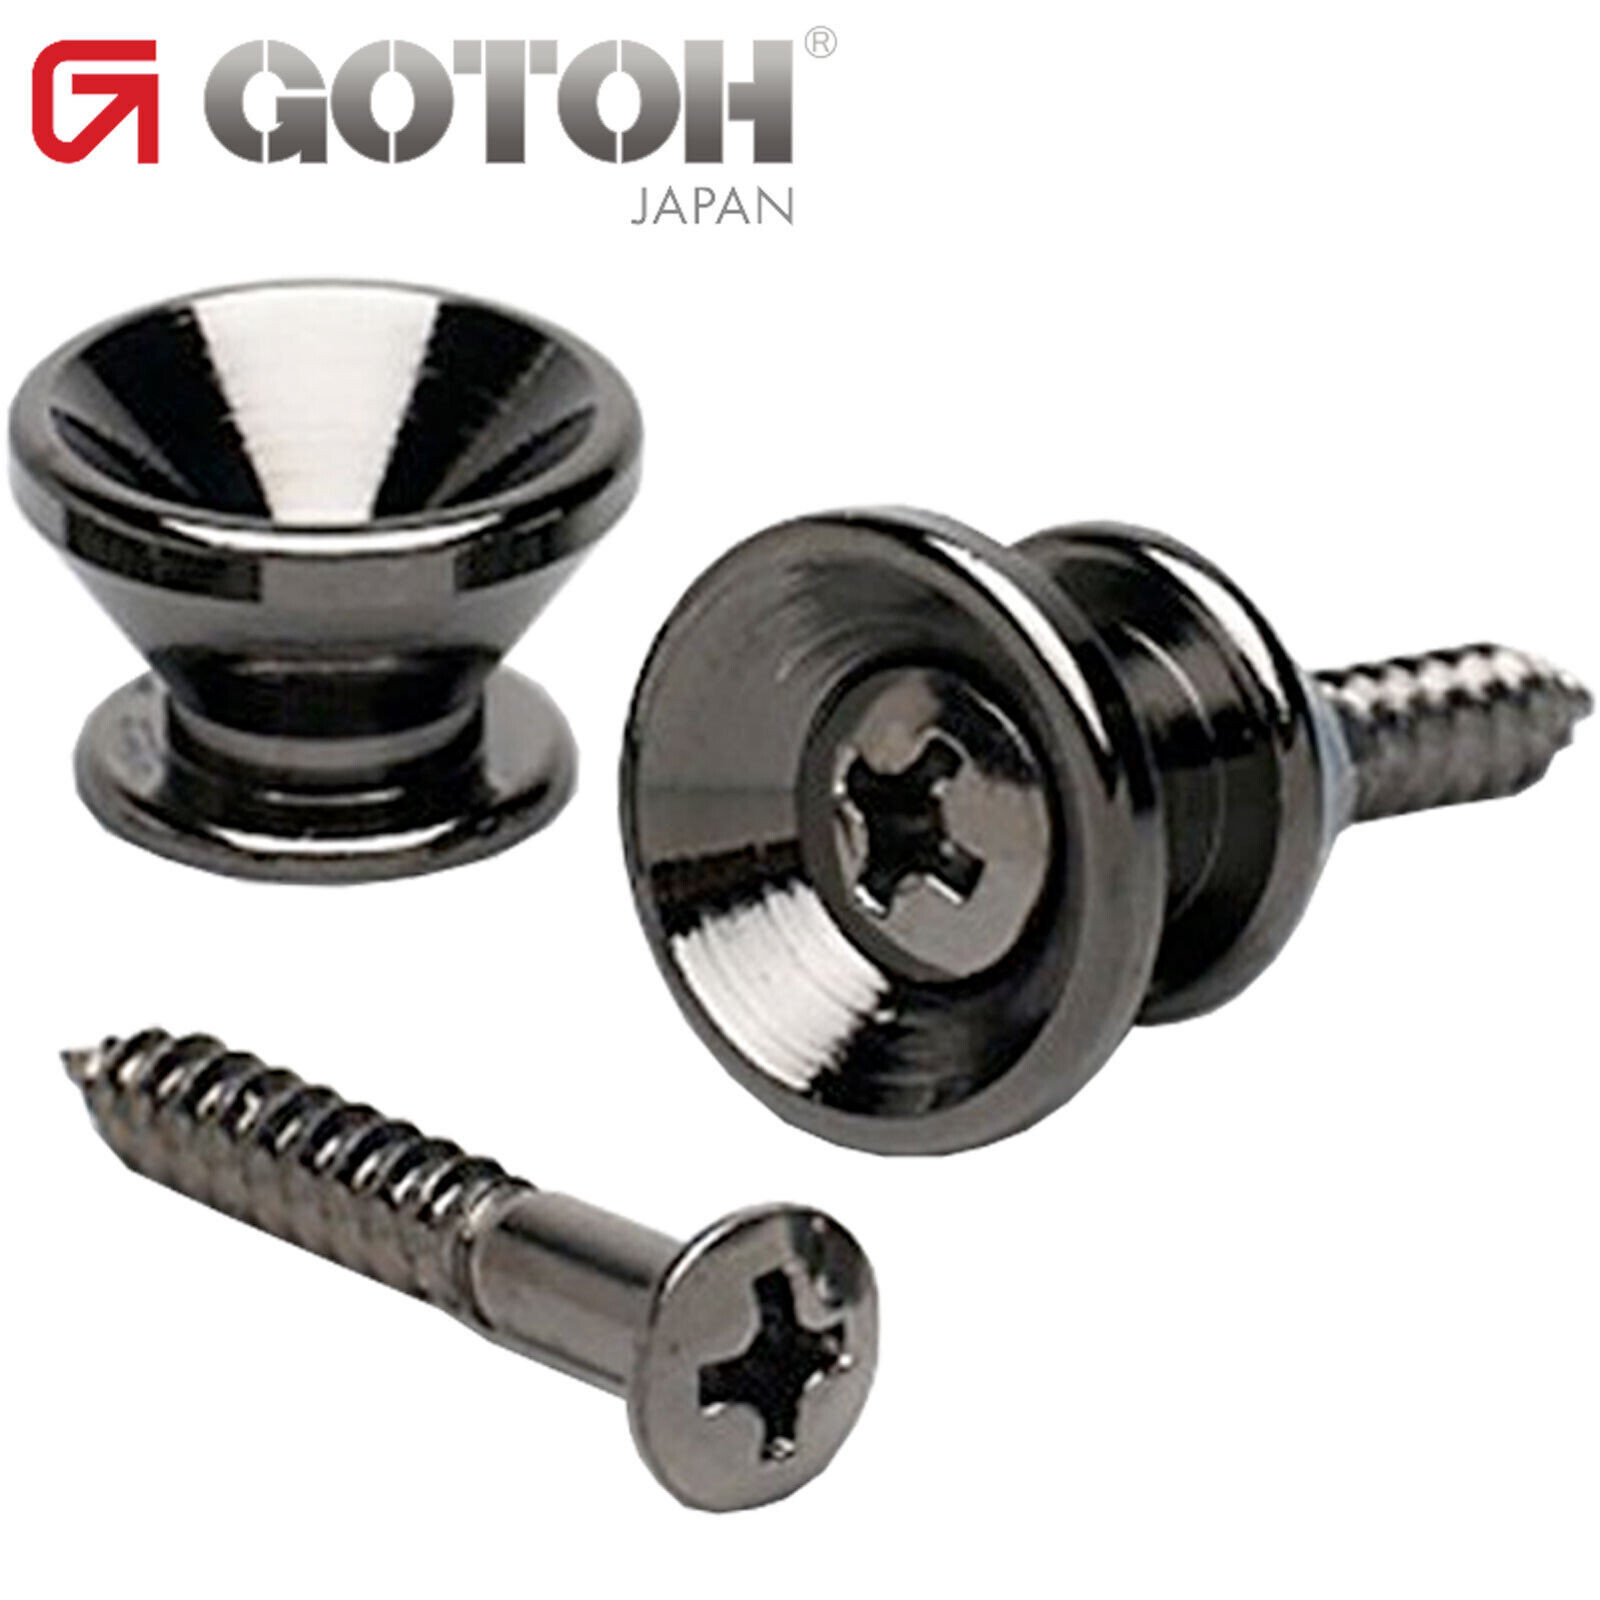 NEW Gotoh EP-B2 End Pins Strap Button for Fender® Guitar & Bass - COSMO BLACK. Available Now for $9.95